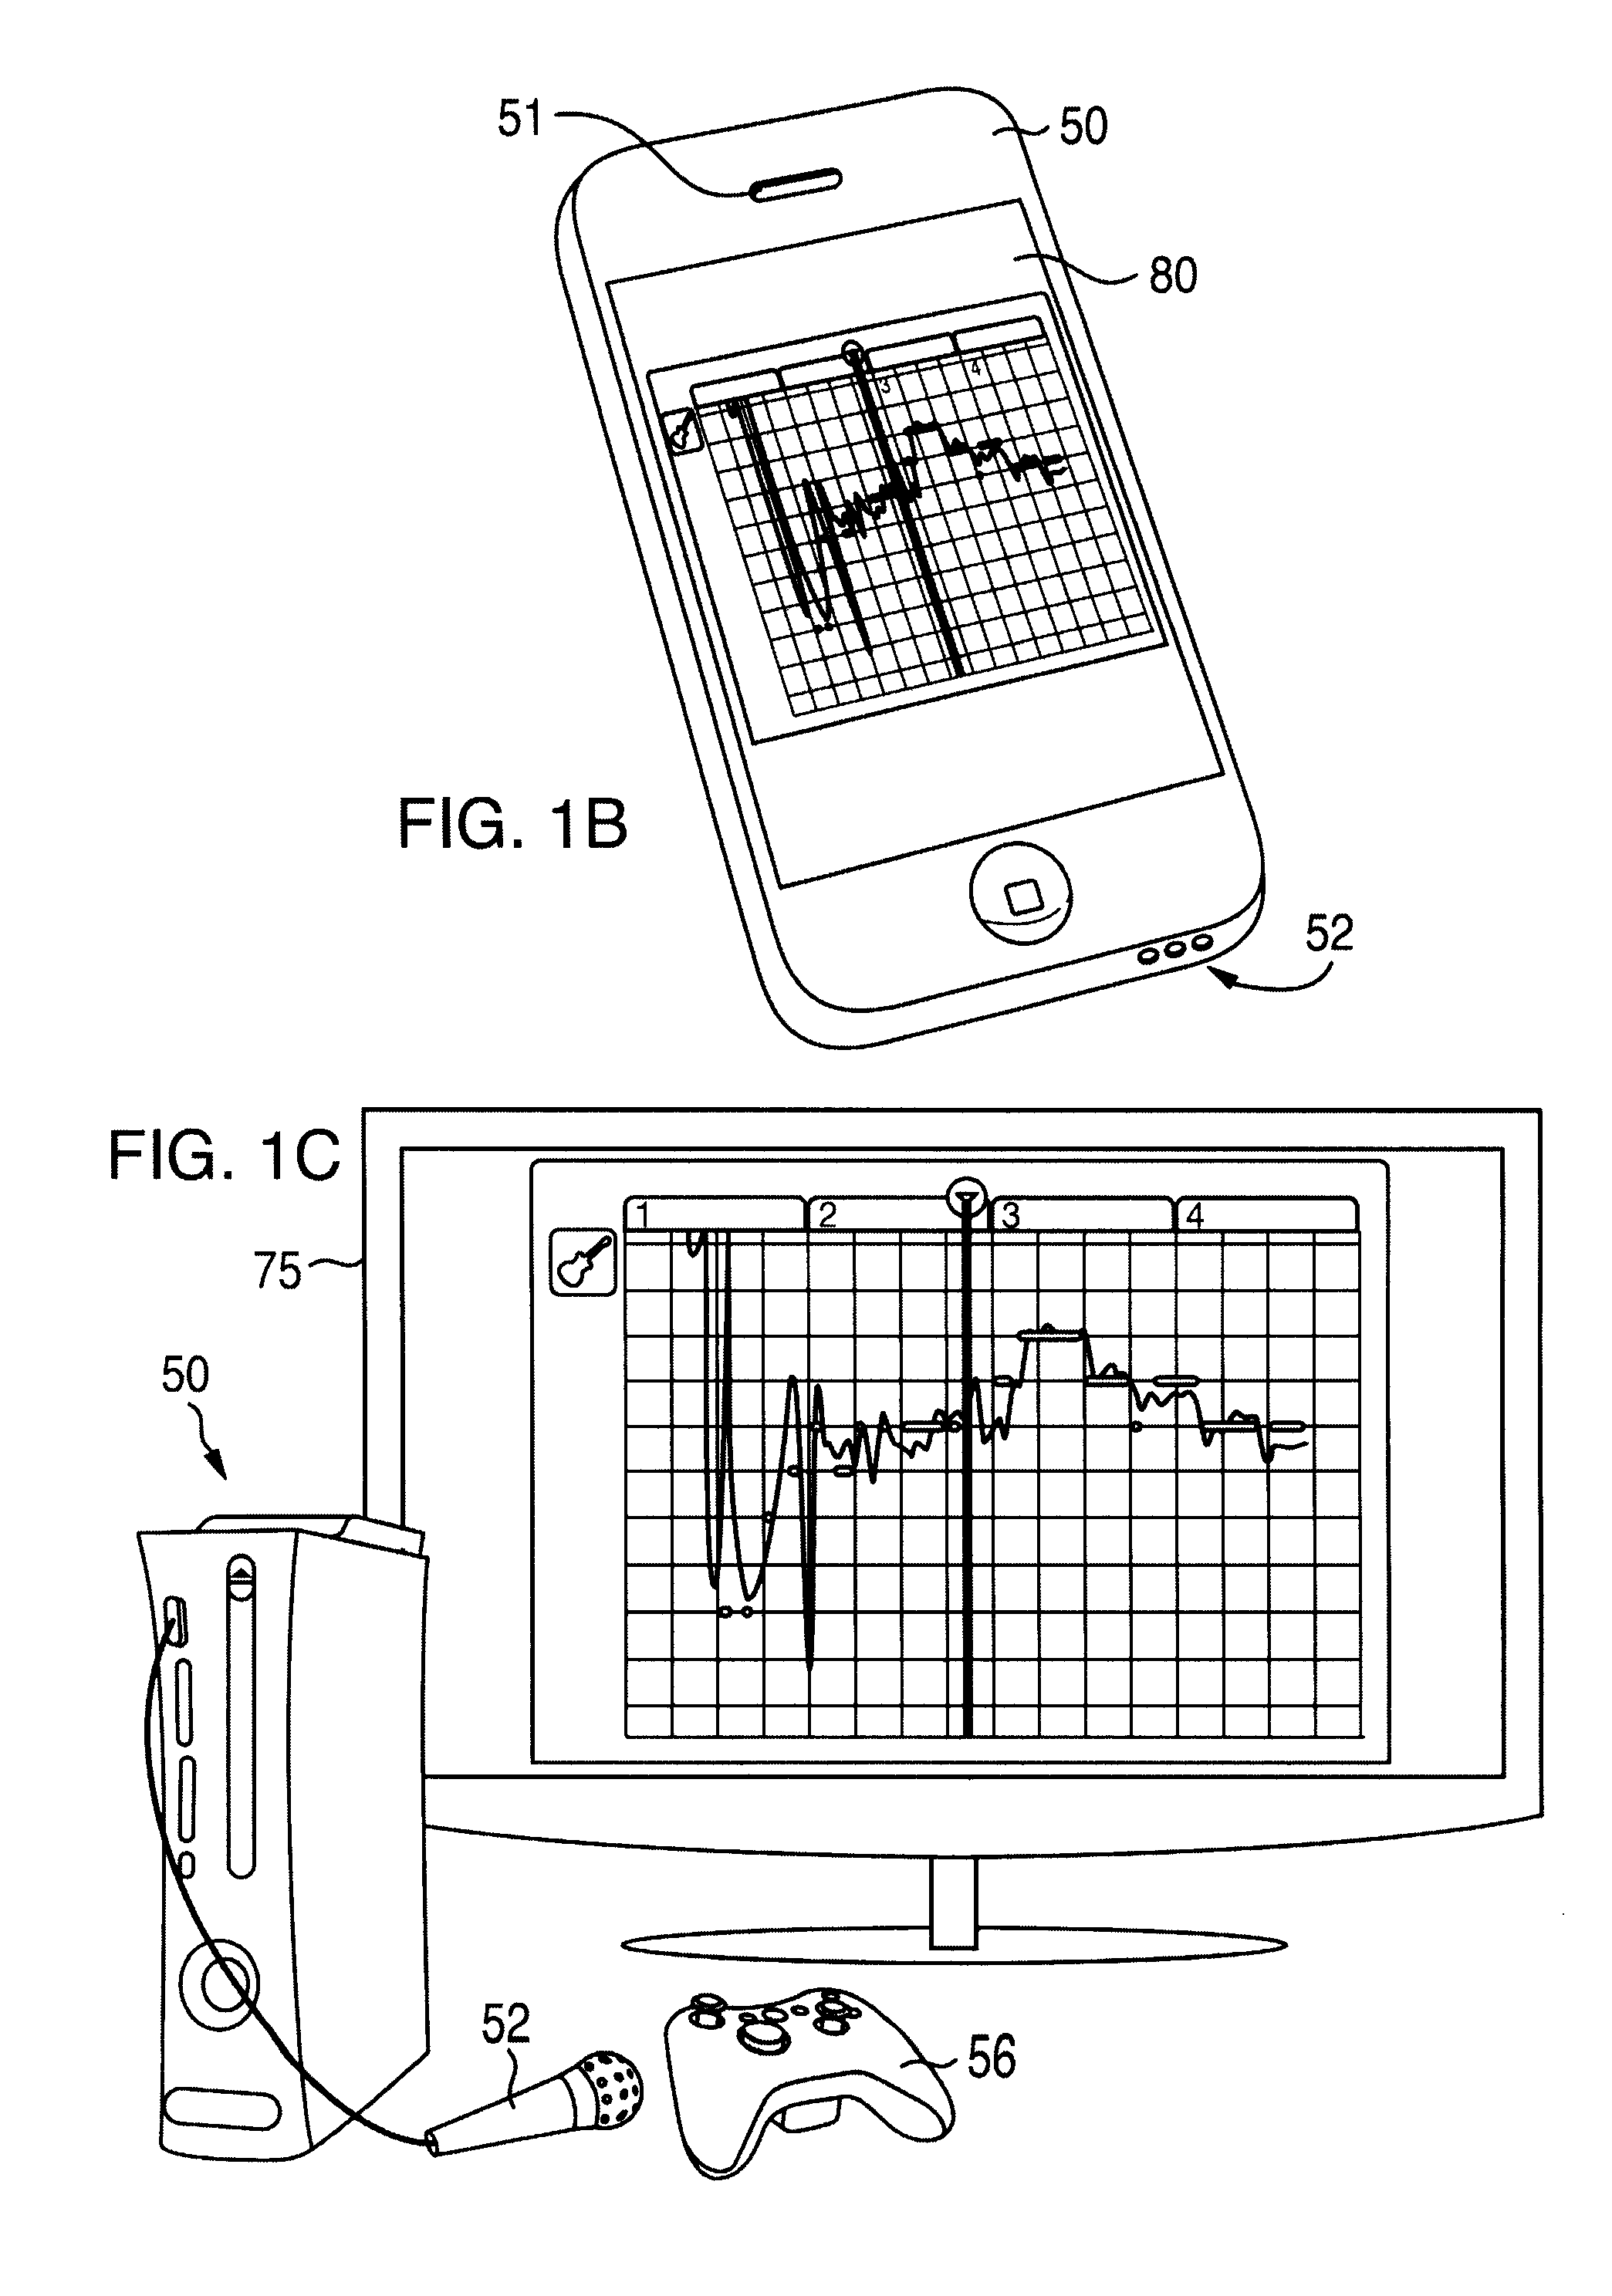 System and Method for Applying a Chain of Effects to a Musical Composition